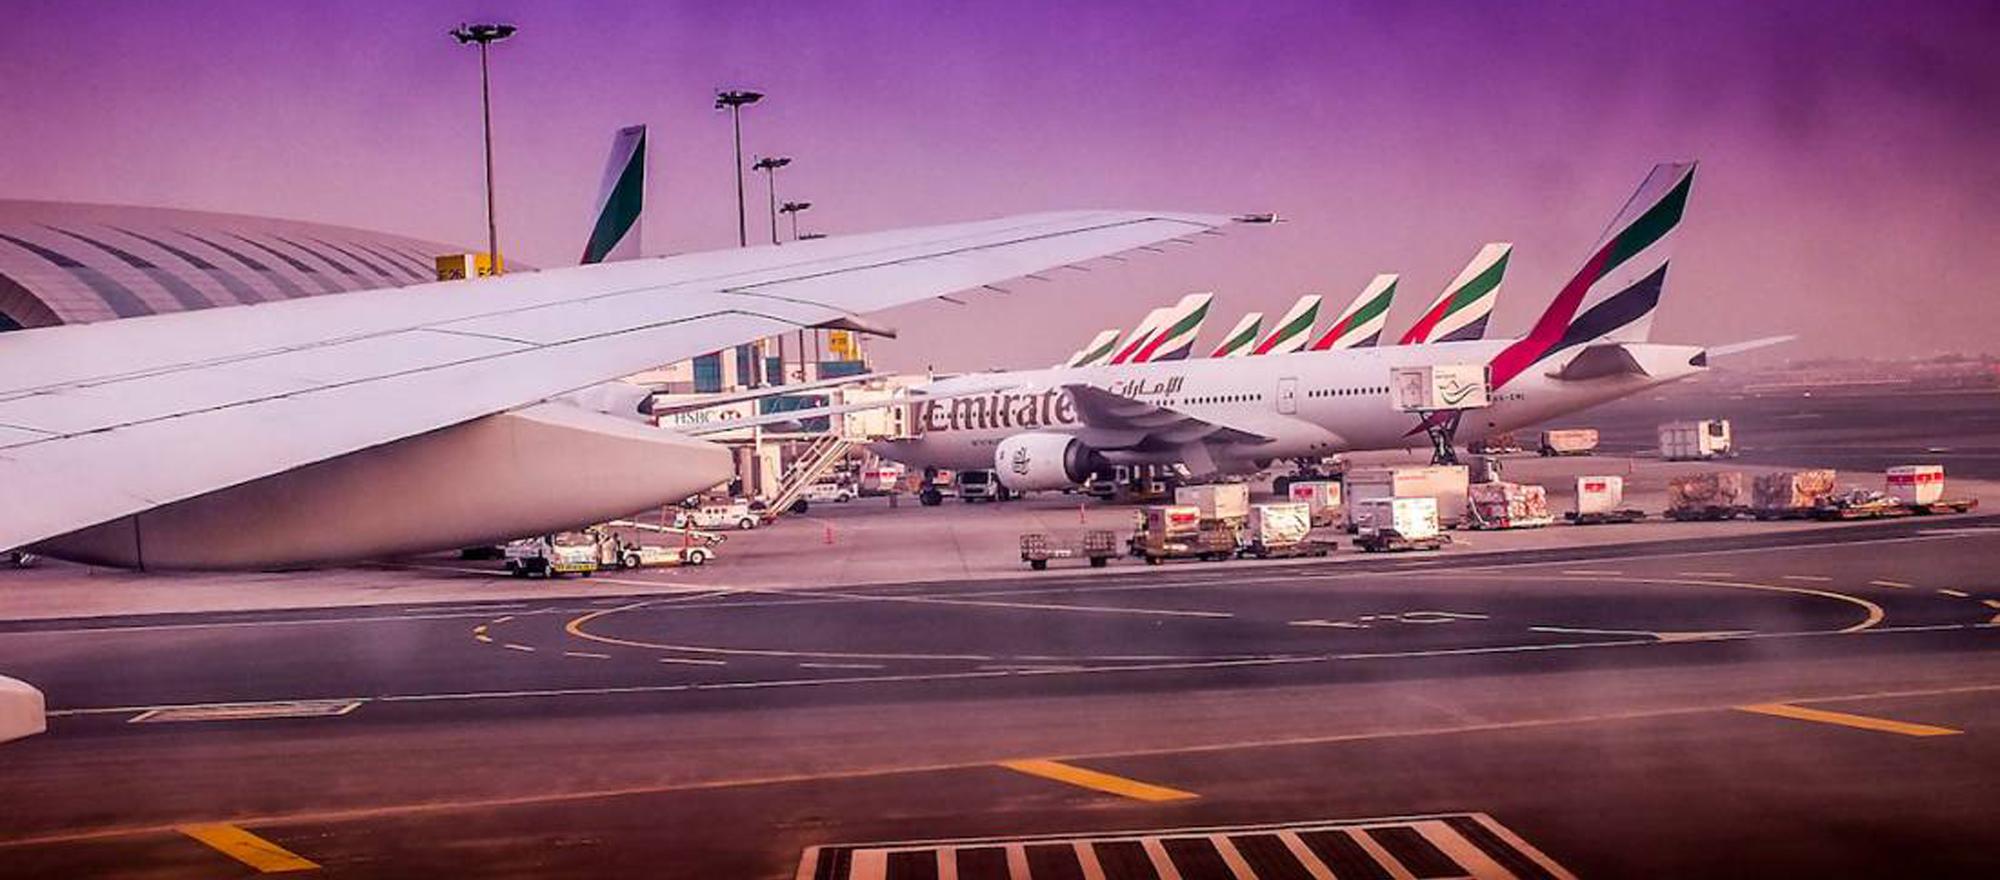 Airlines around the world, including those connecting transiting passengers at Dubai International Airport, over the weekend began boarding U.S.-bound nationals from the seven Muslim-majority countries on the now blocked Trump travel ban.   